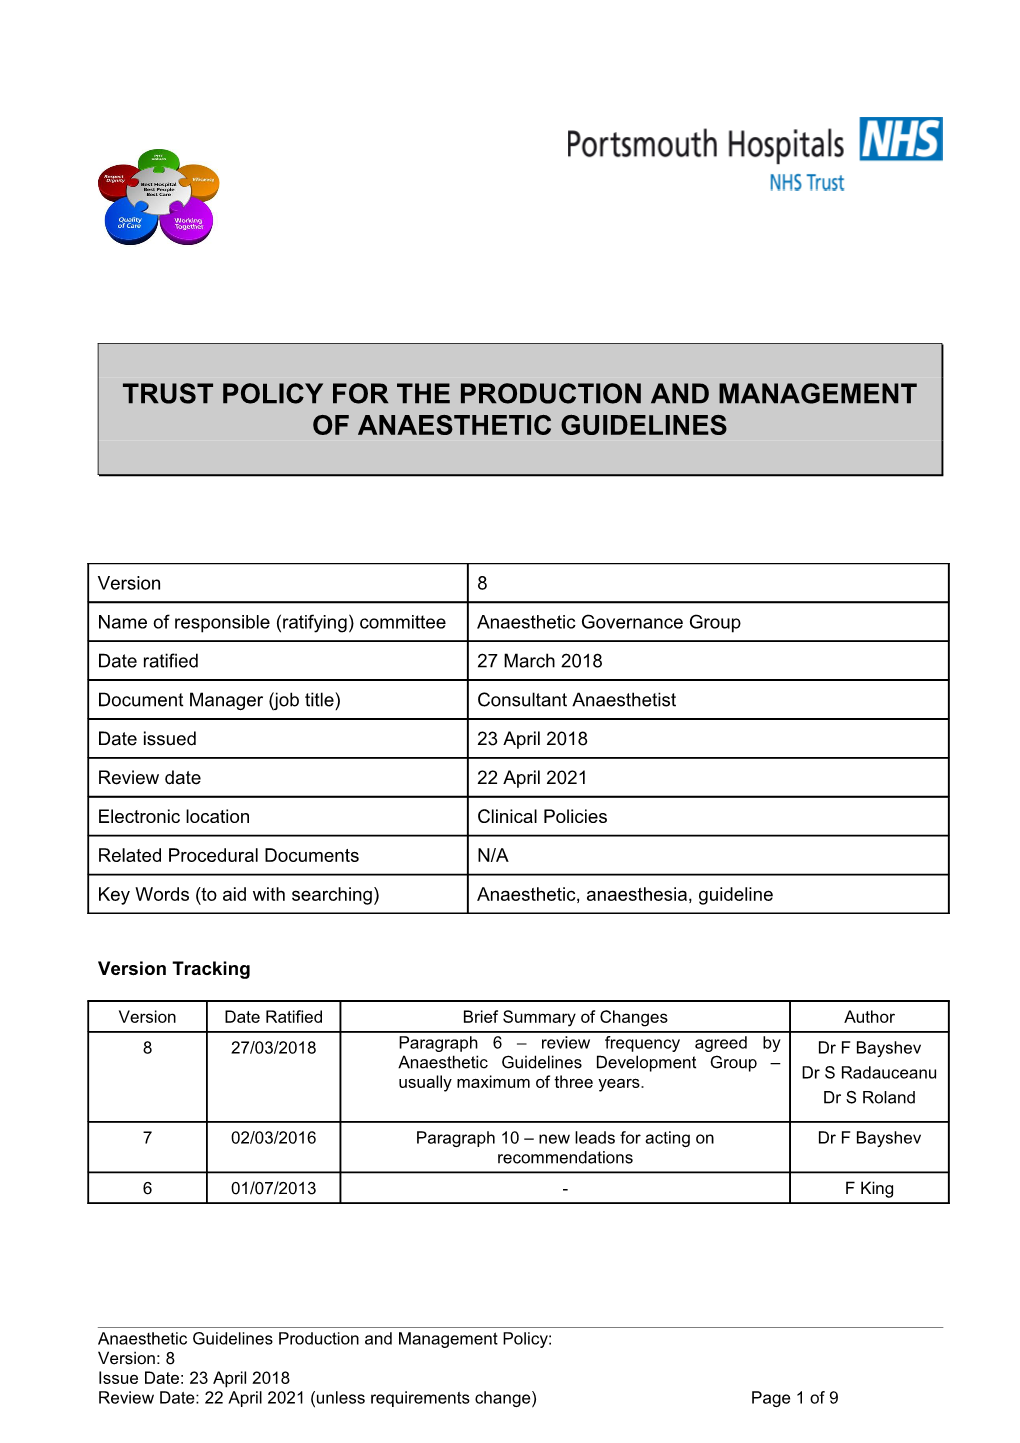 Trust Policy for the Production and Management of Anaesthetic Guidelines